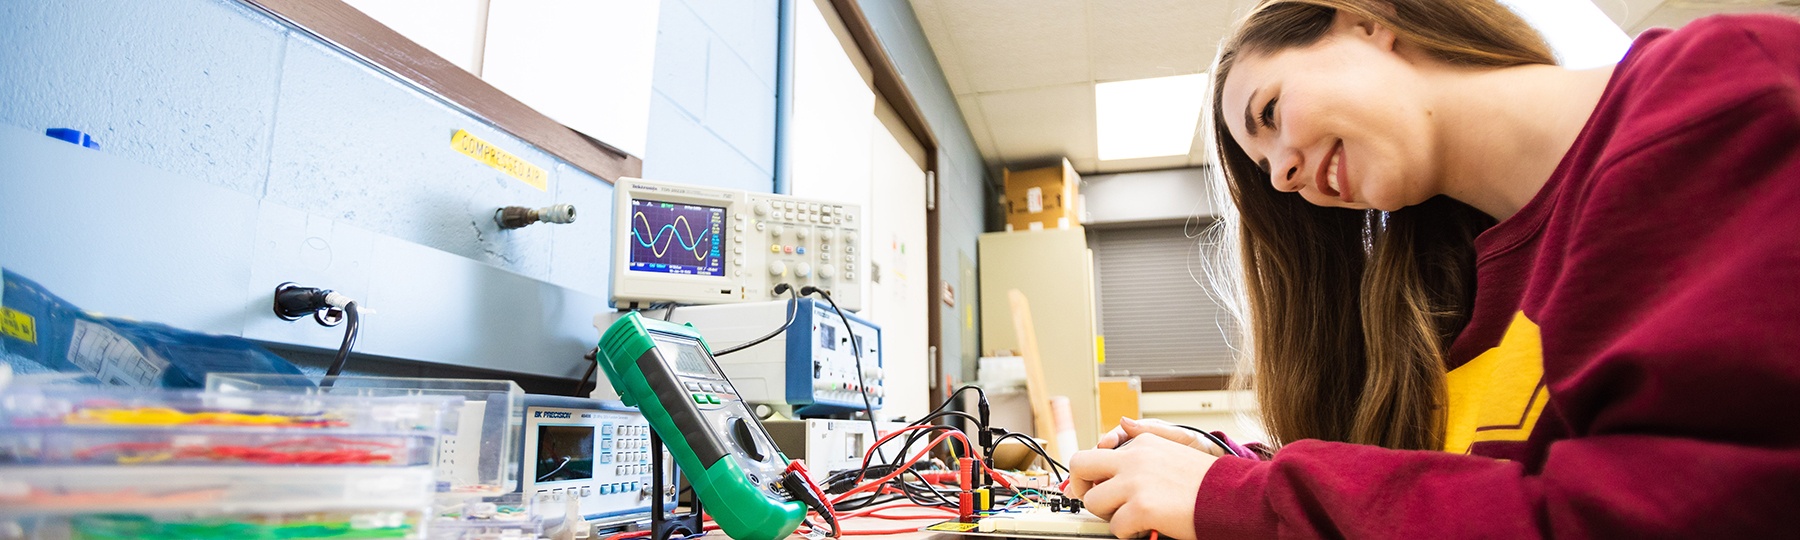 Engineering student Julia Reynolds adjusts equipment in the Electronic Engineering Lab.